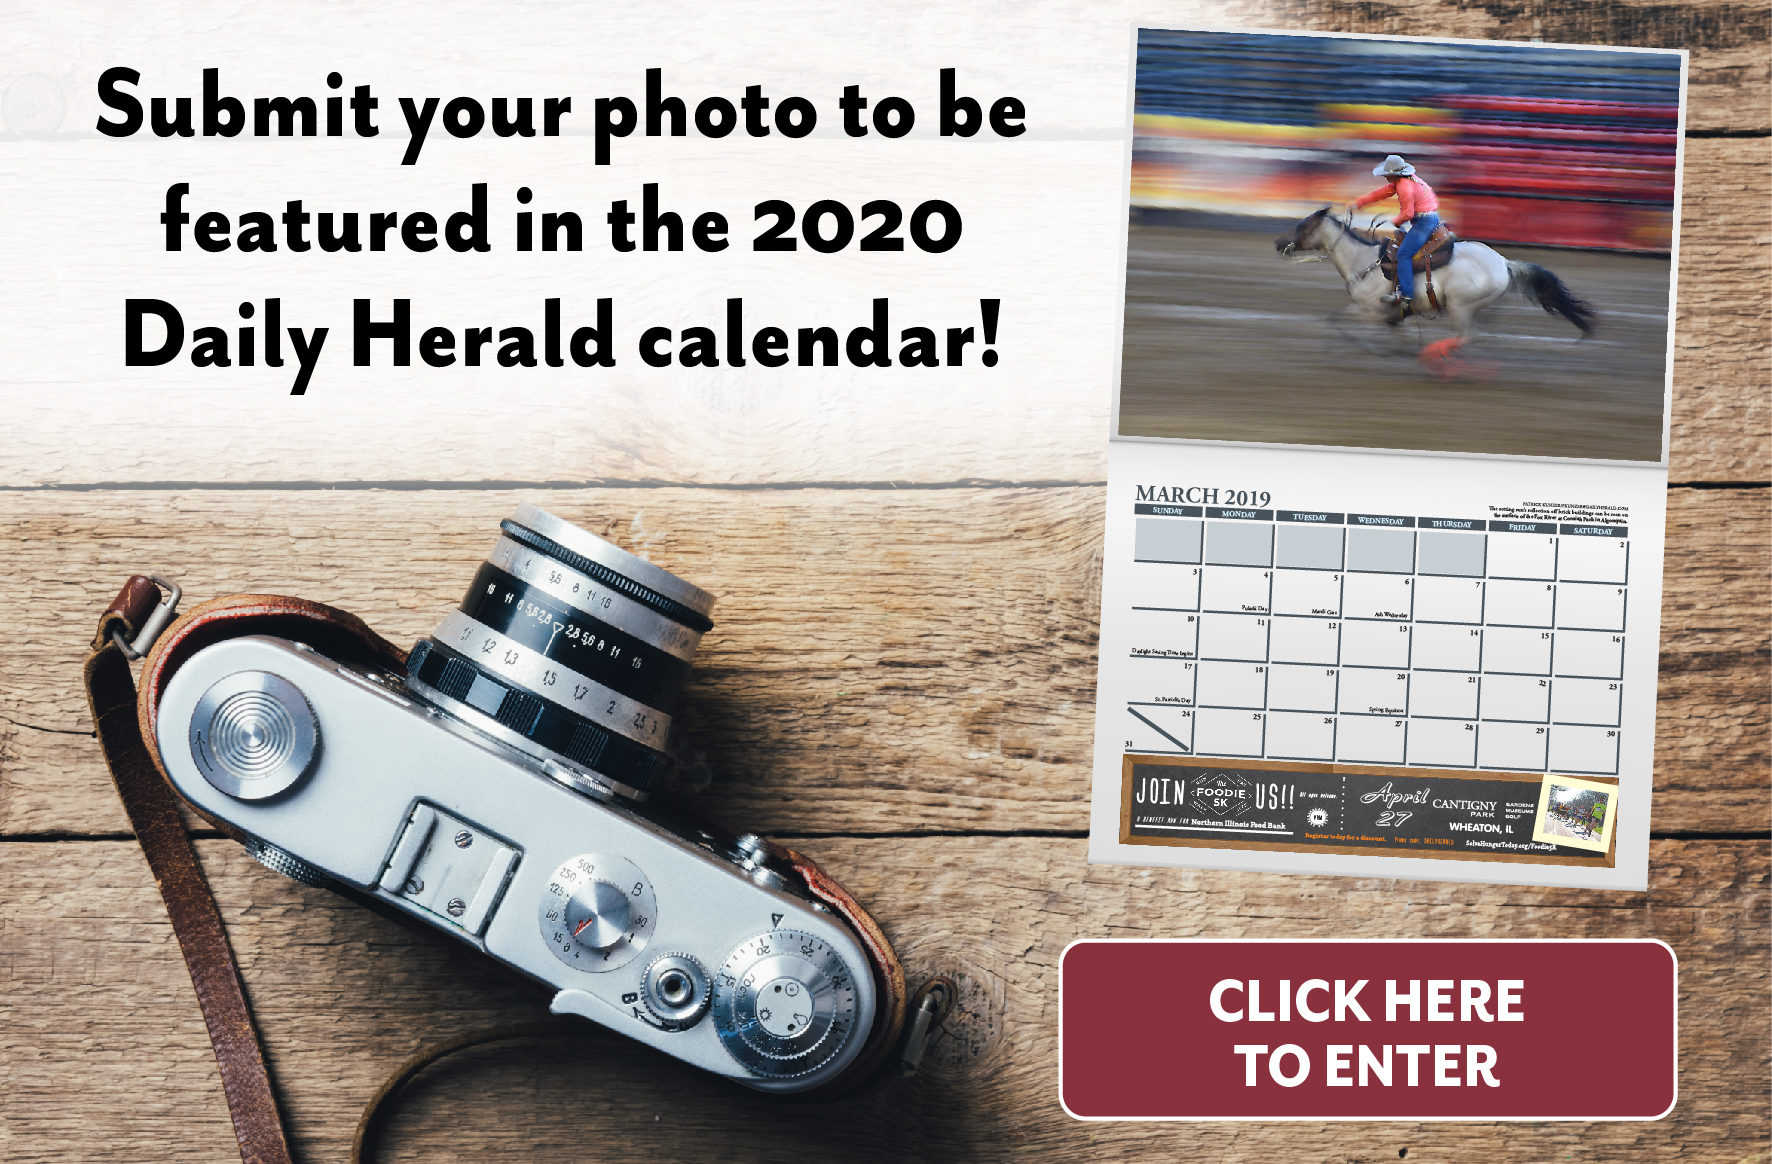 Daily Herald Calendar Contest Daily Herald Events